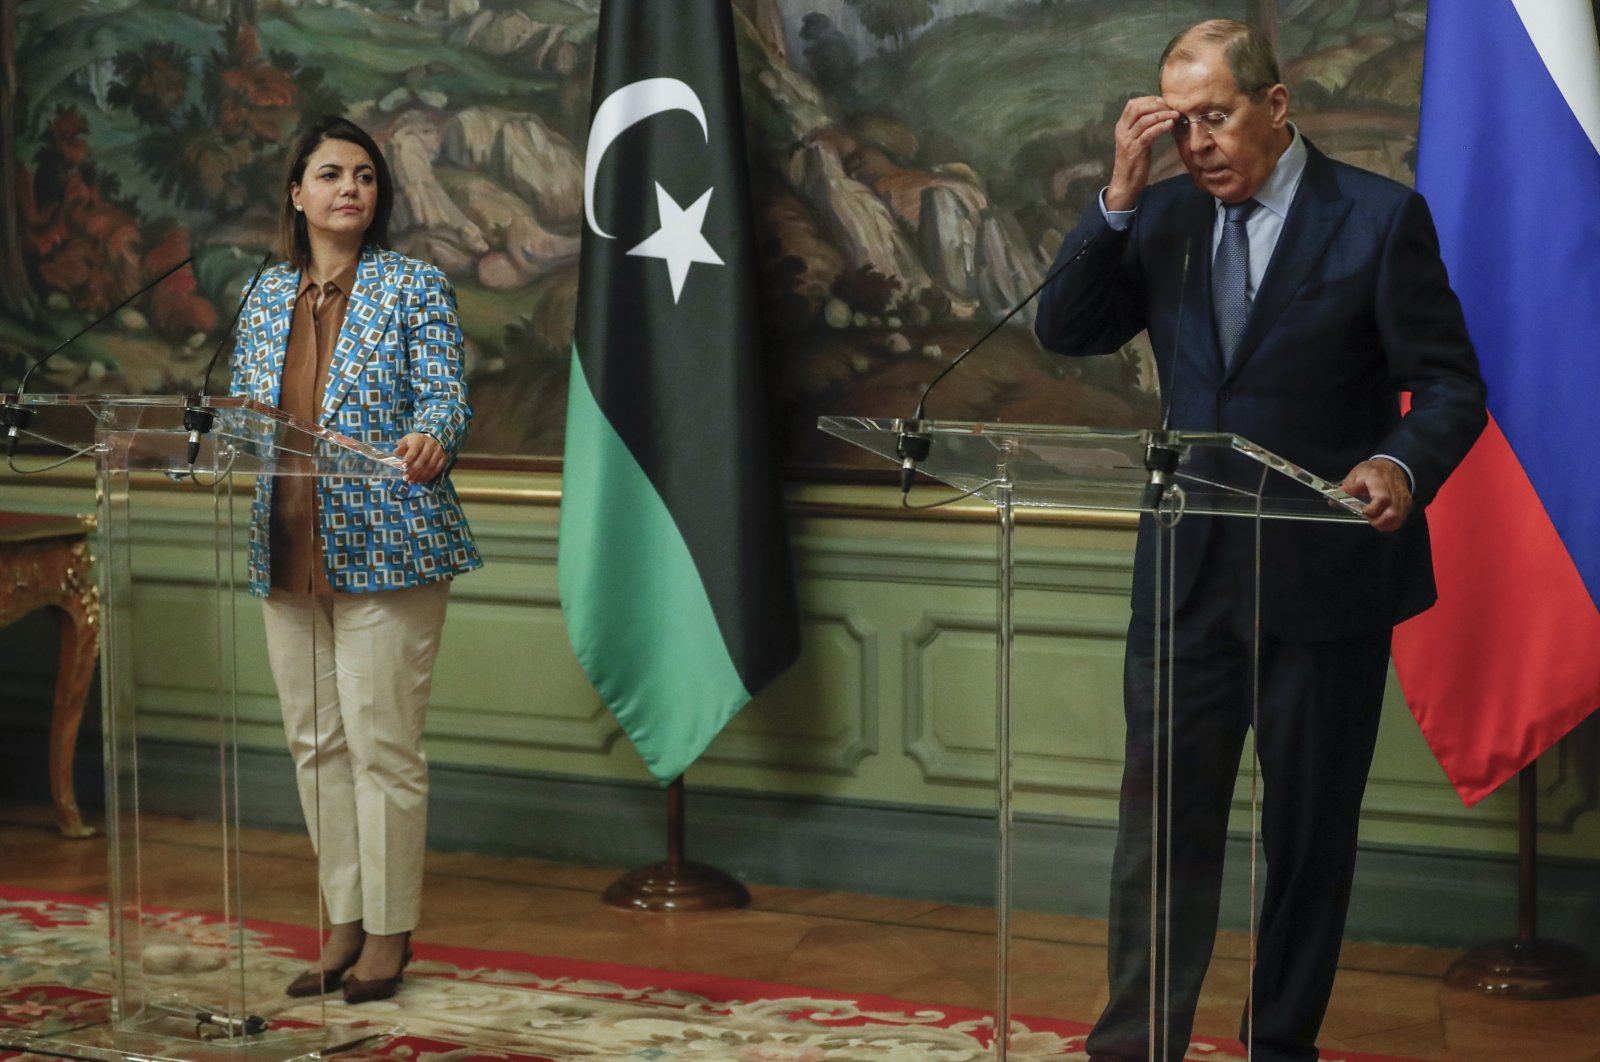 Russian Foreign Minister Sergey and Libyan Foreign Minister Najla Mangoush attend a joint news conference following their talks in Moscow, Russia, Aug. 19, 2021. (Maxim Shipenkov/Pool Photo via AP)